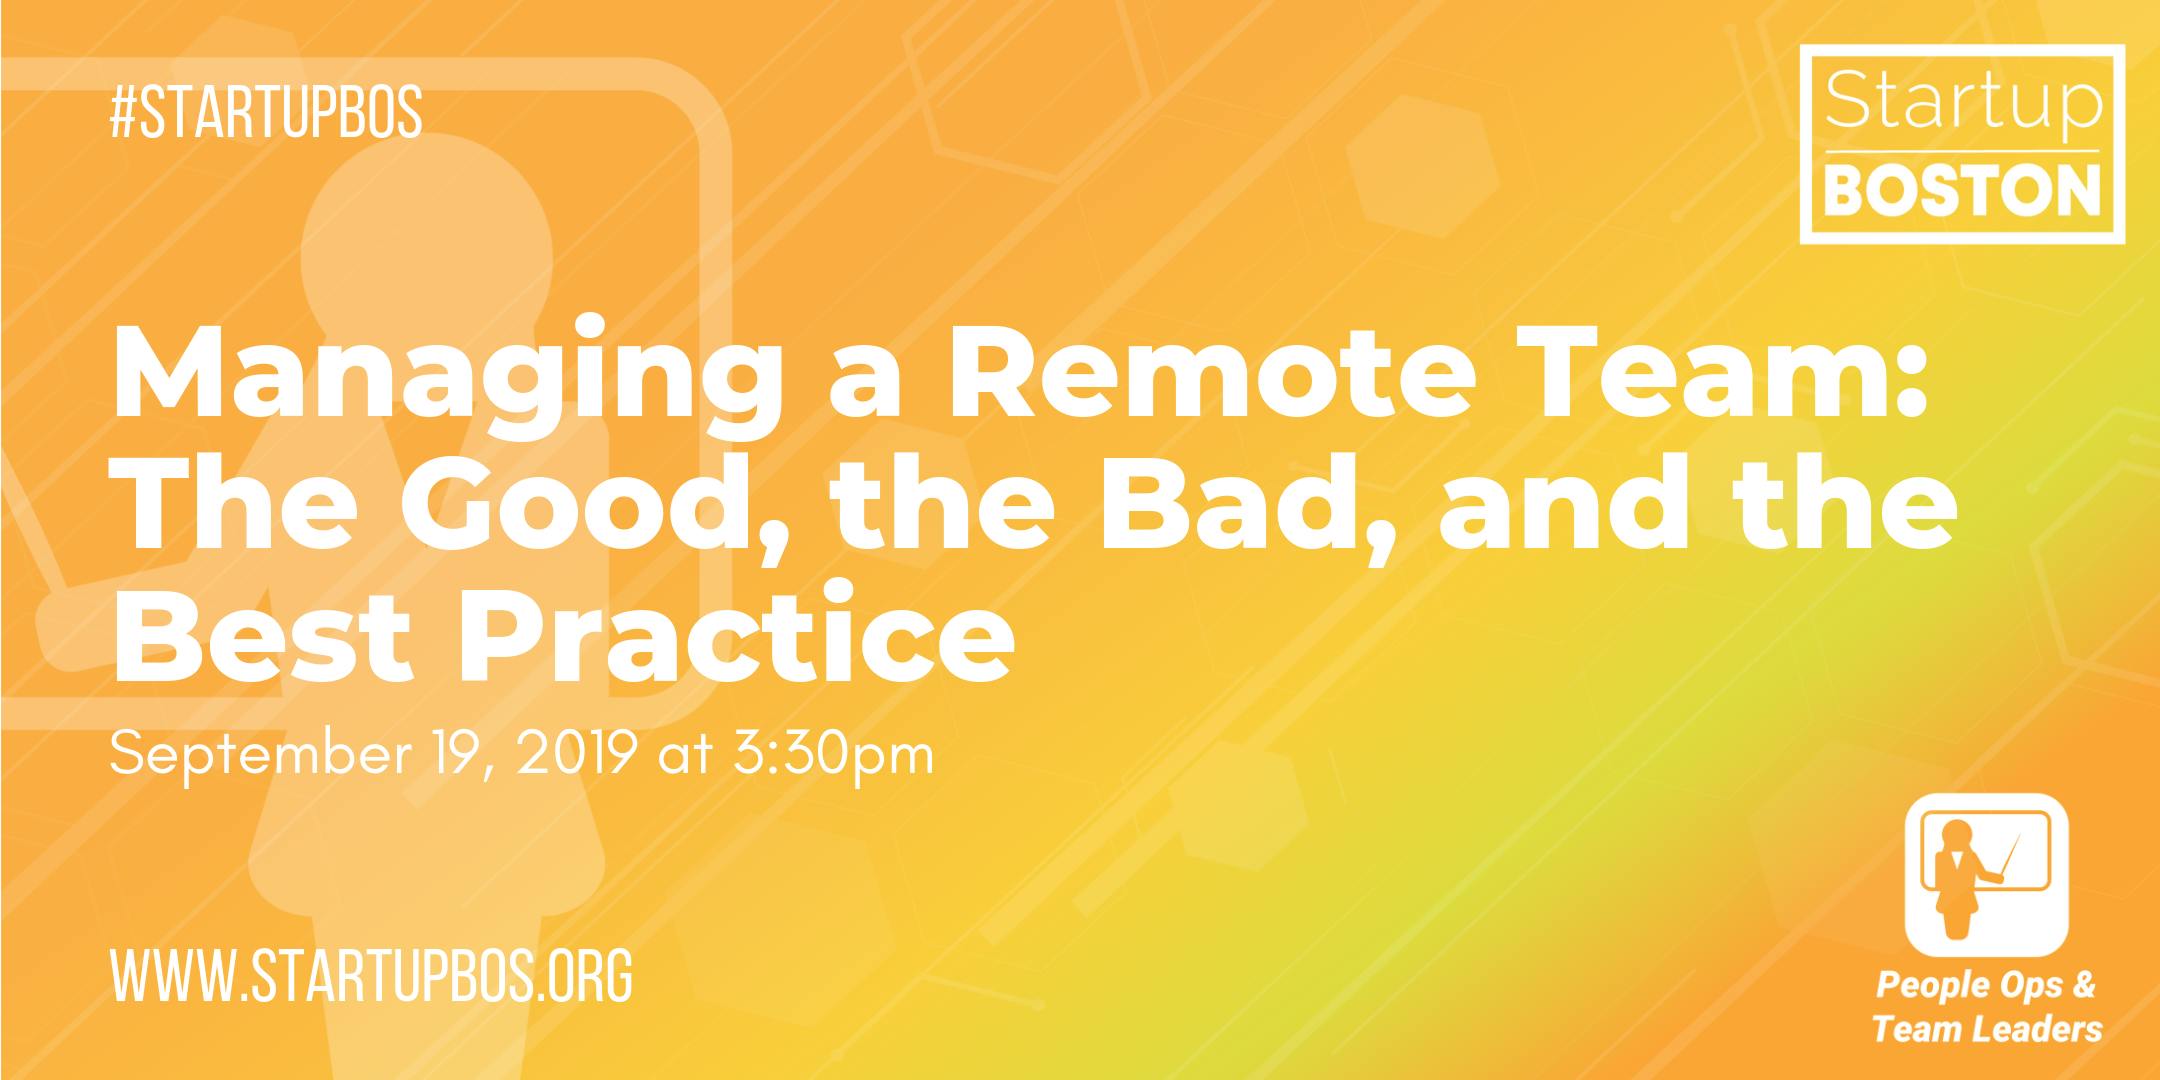 Managing a Remote Team: The Good, the Bad, and the Best Practice